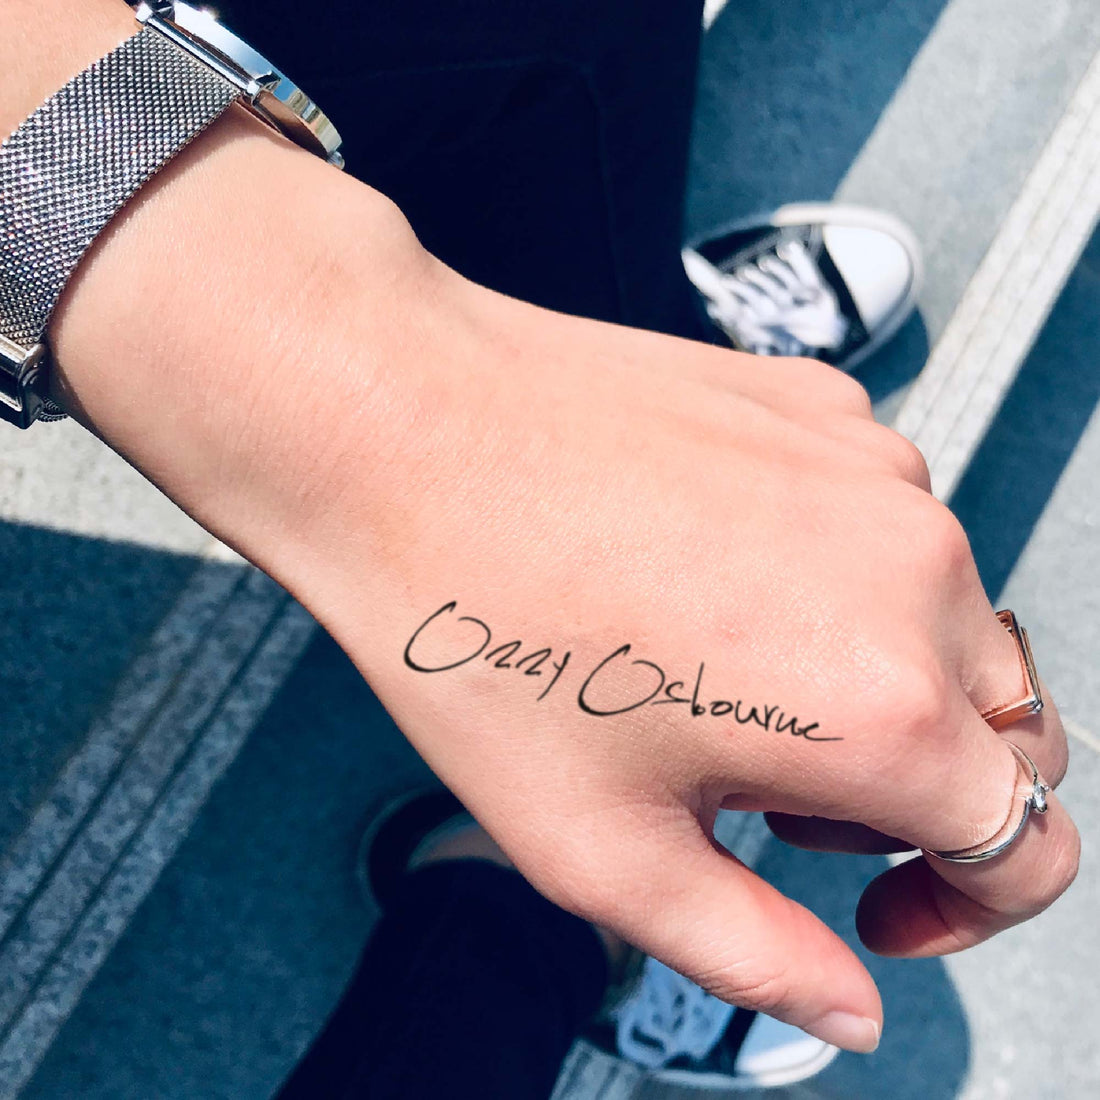 Ozzy Osbourne custom temporary tattoo sticker design idea inspiration meanings removal arm wrist hand words font name signature calligraphy lyrics tour concert outfits merch accessory gift souvenir costumes wear dress up code